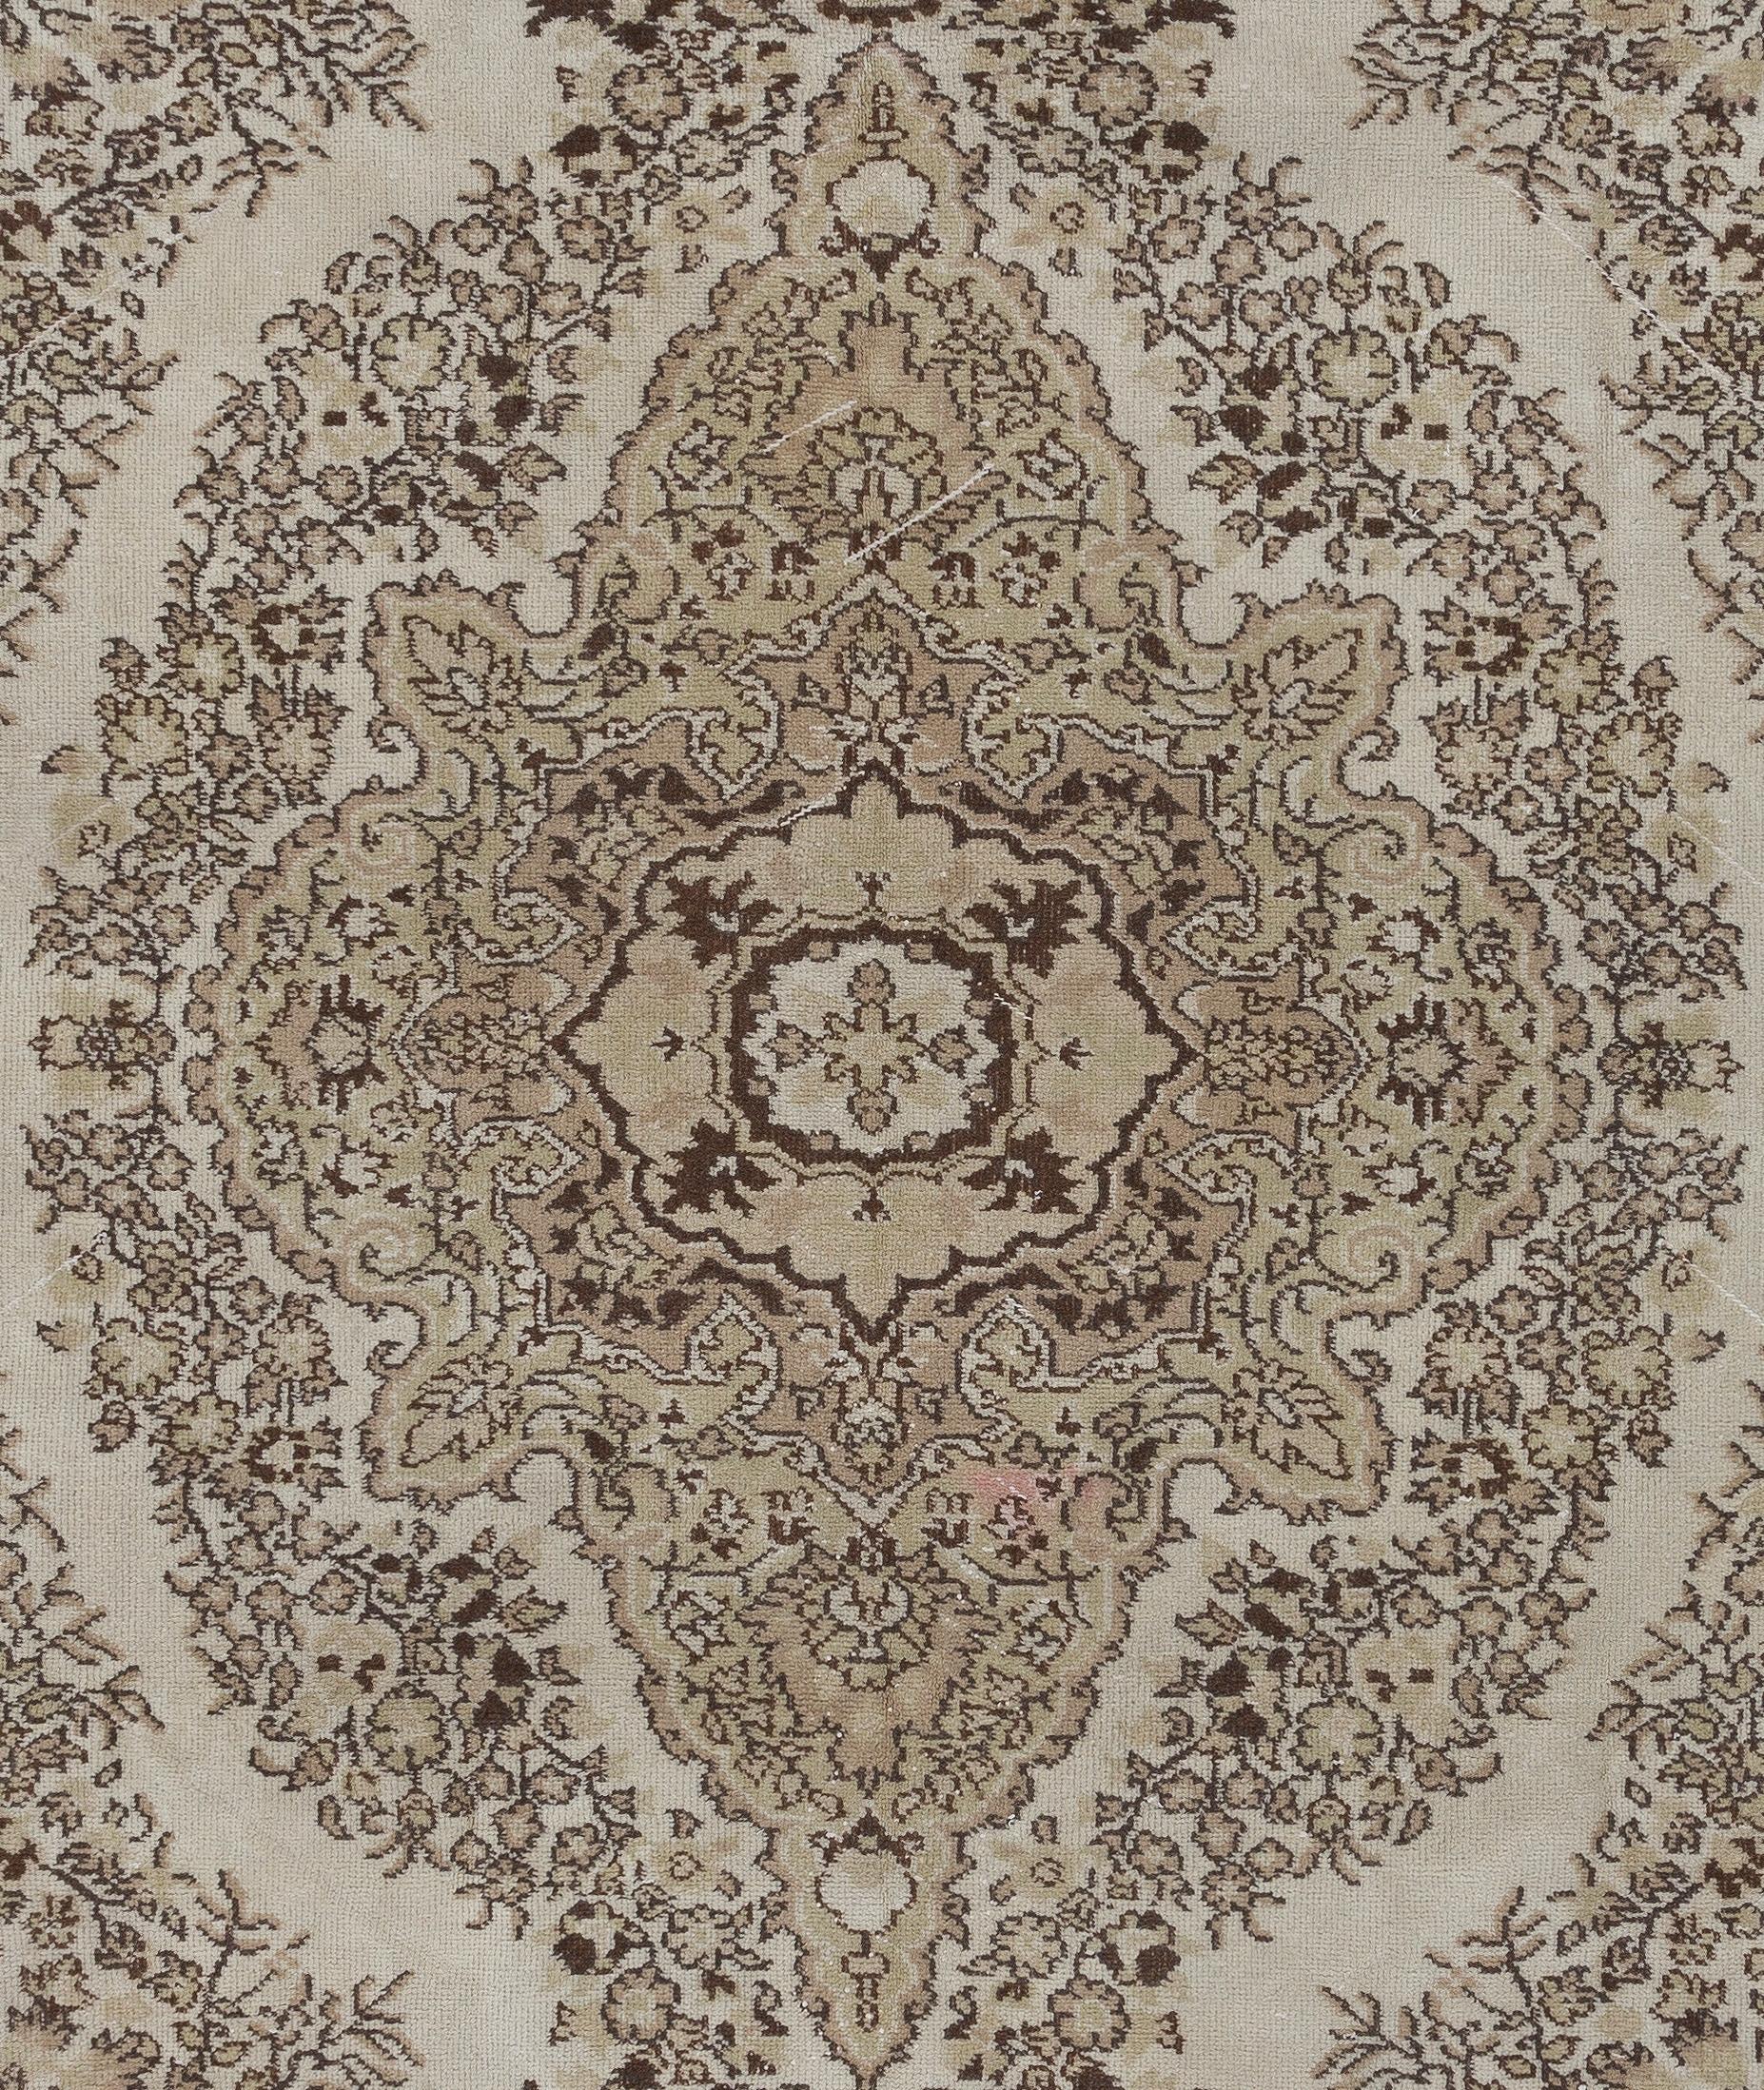 7.3x10.5 Ft Handmade Vintage Floral Turkish Wool Area Rug in Neutral Tones In Good Condition For Sale In Philadelphia, PA